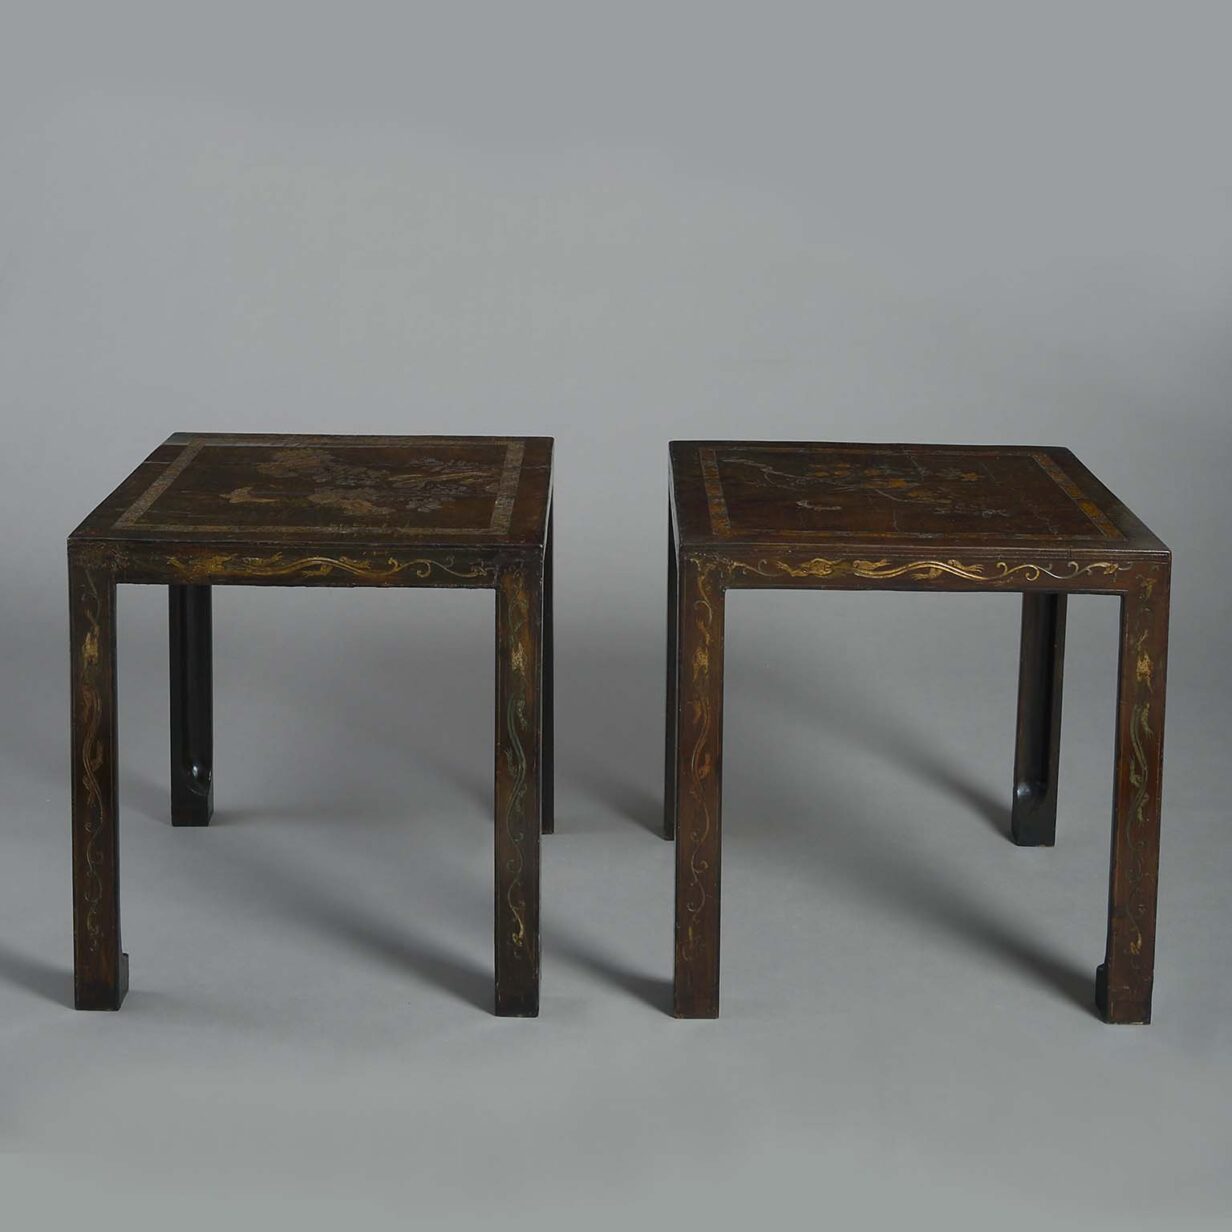 Pair of lacquer low tables